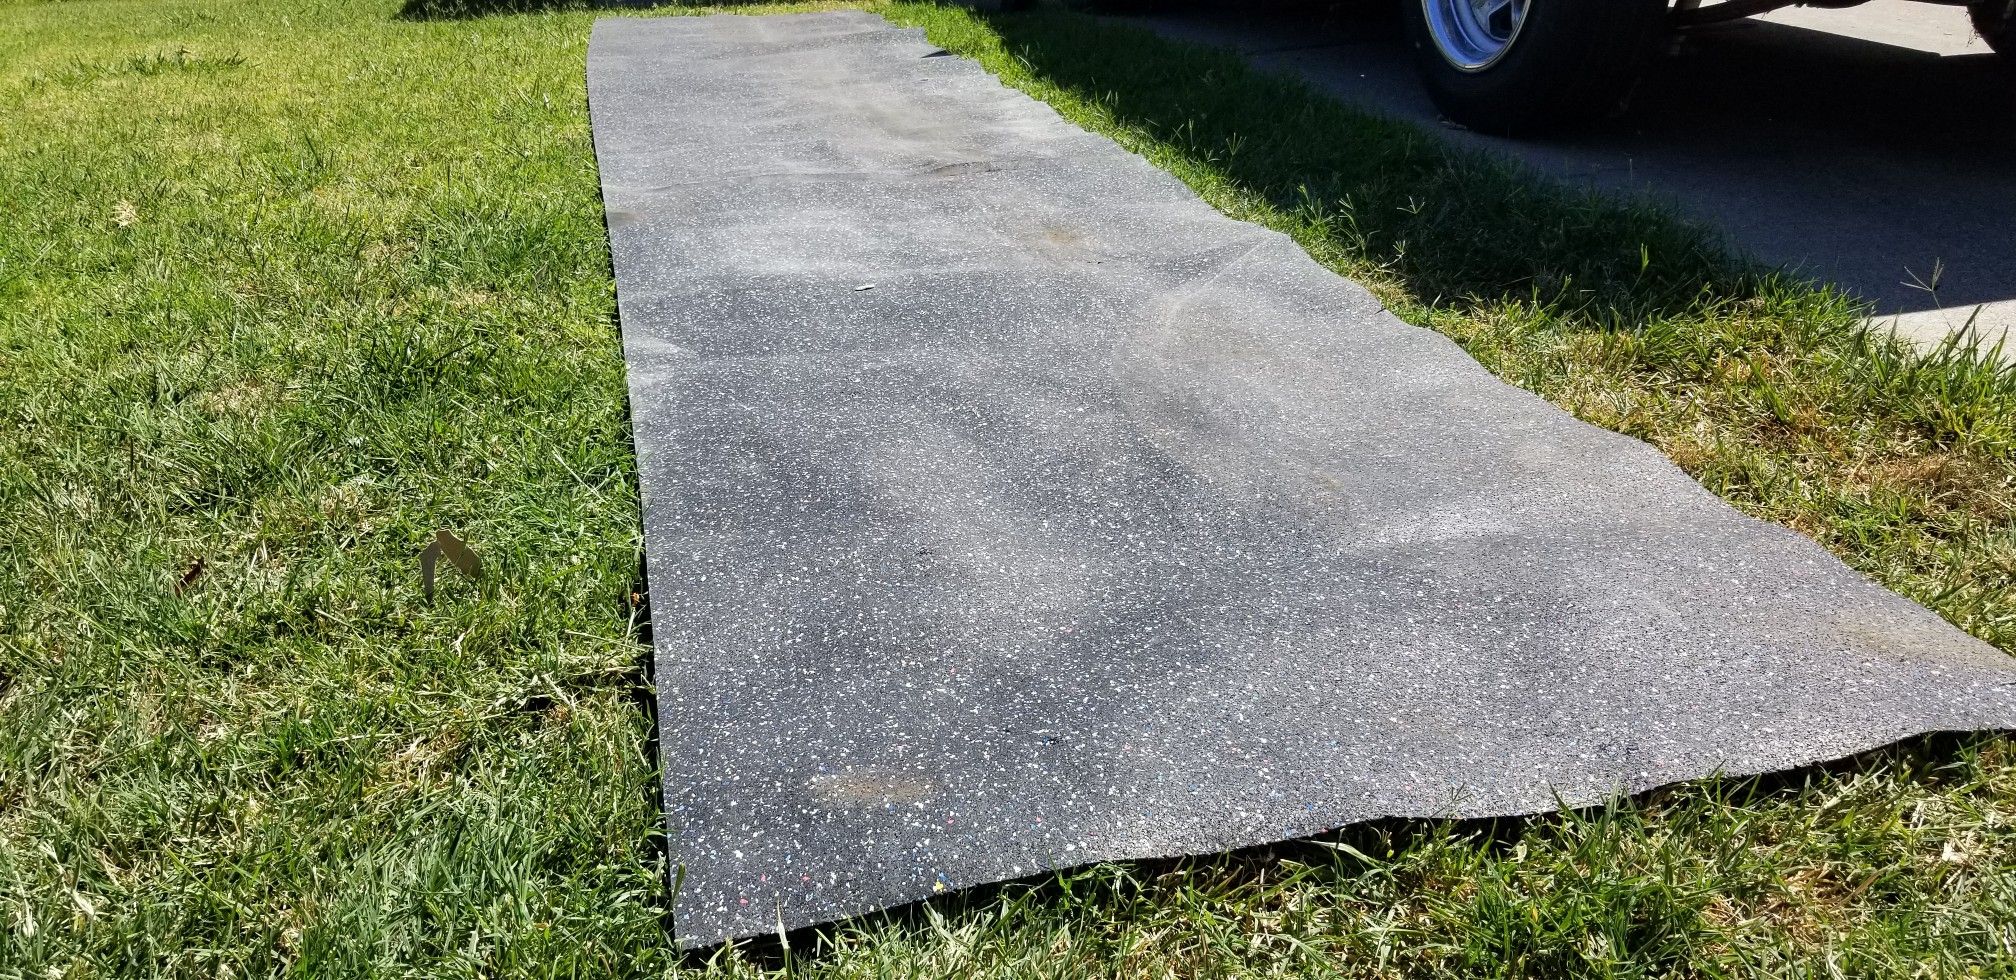 Robber mat (runners) cusion concrete covering